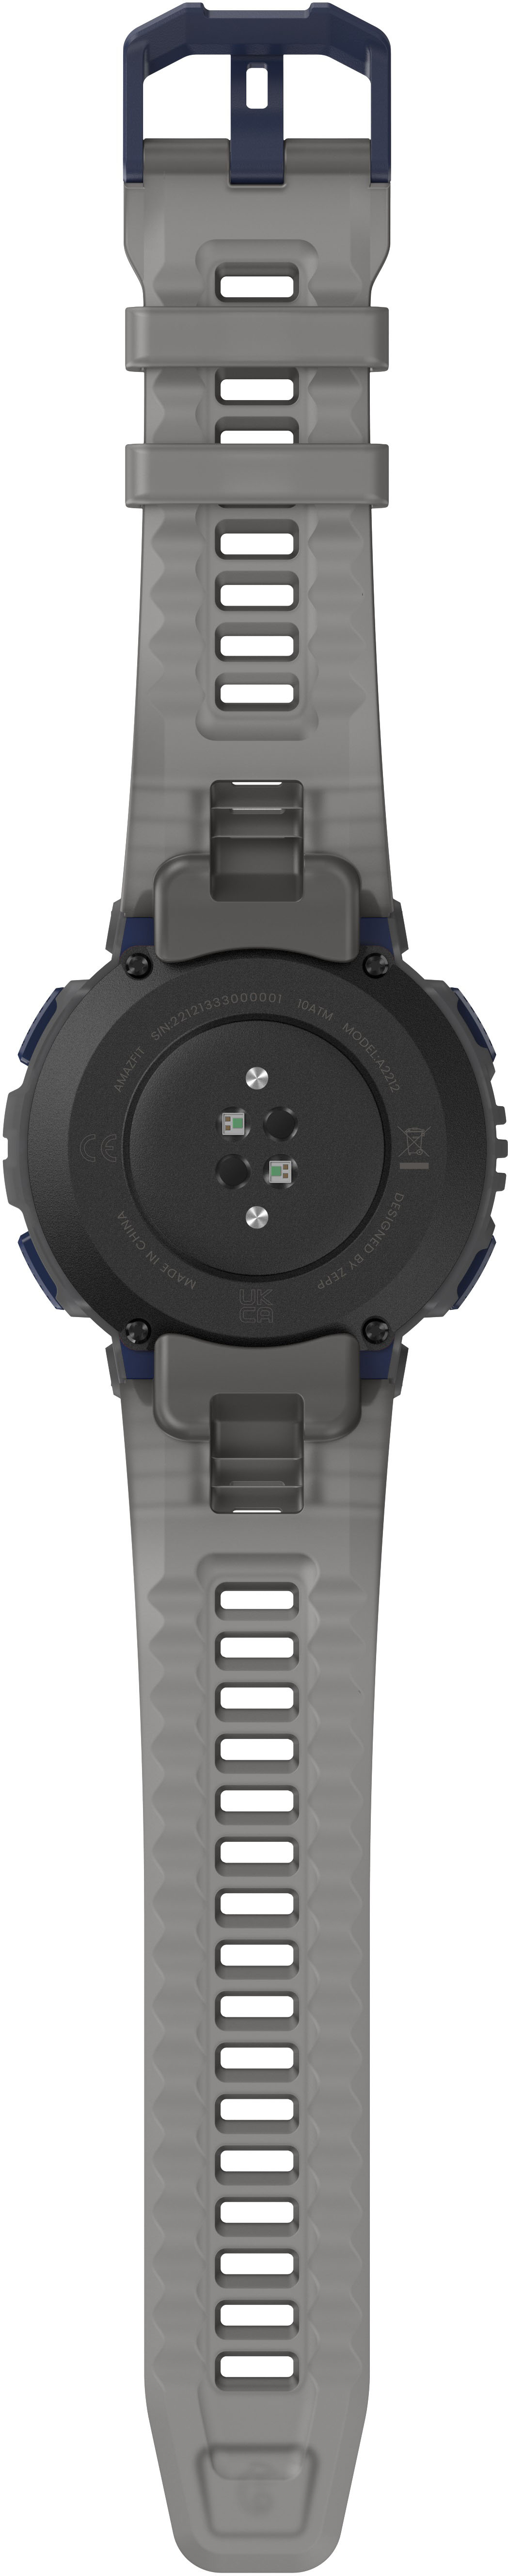 The Amazfit Active Edge Review. The Smartwatch Amazfit Active Edge…, by  Nazimriaz